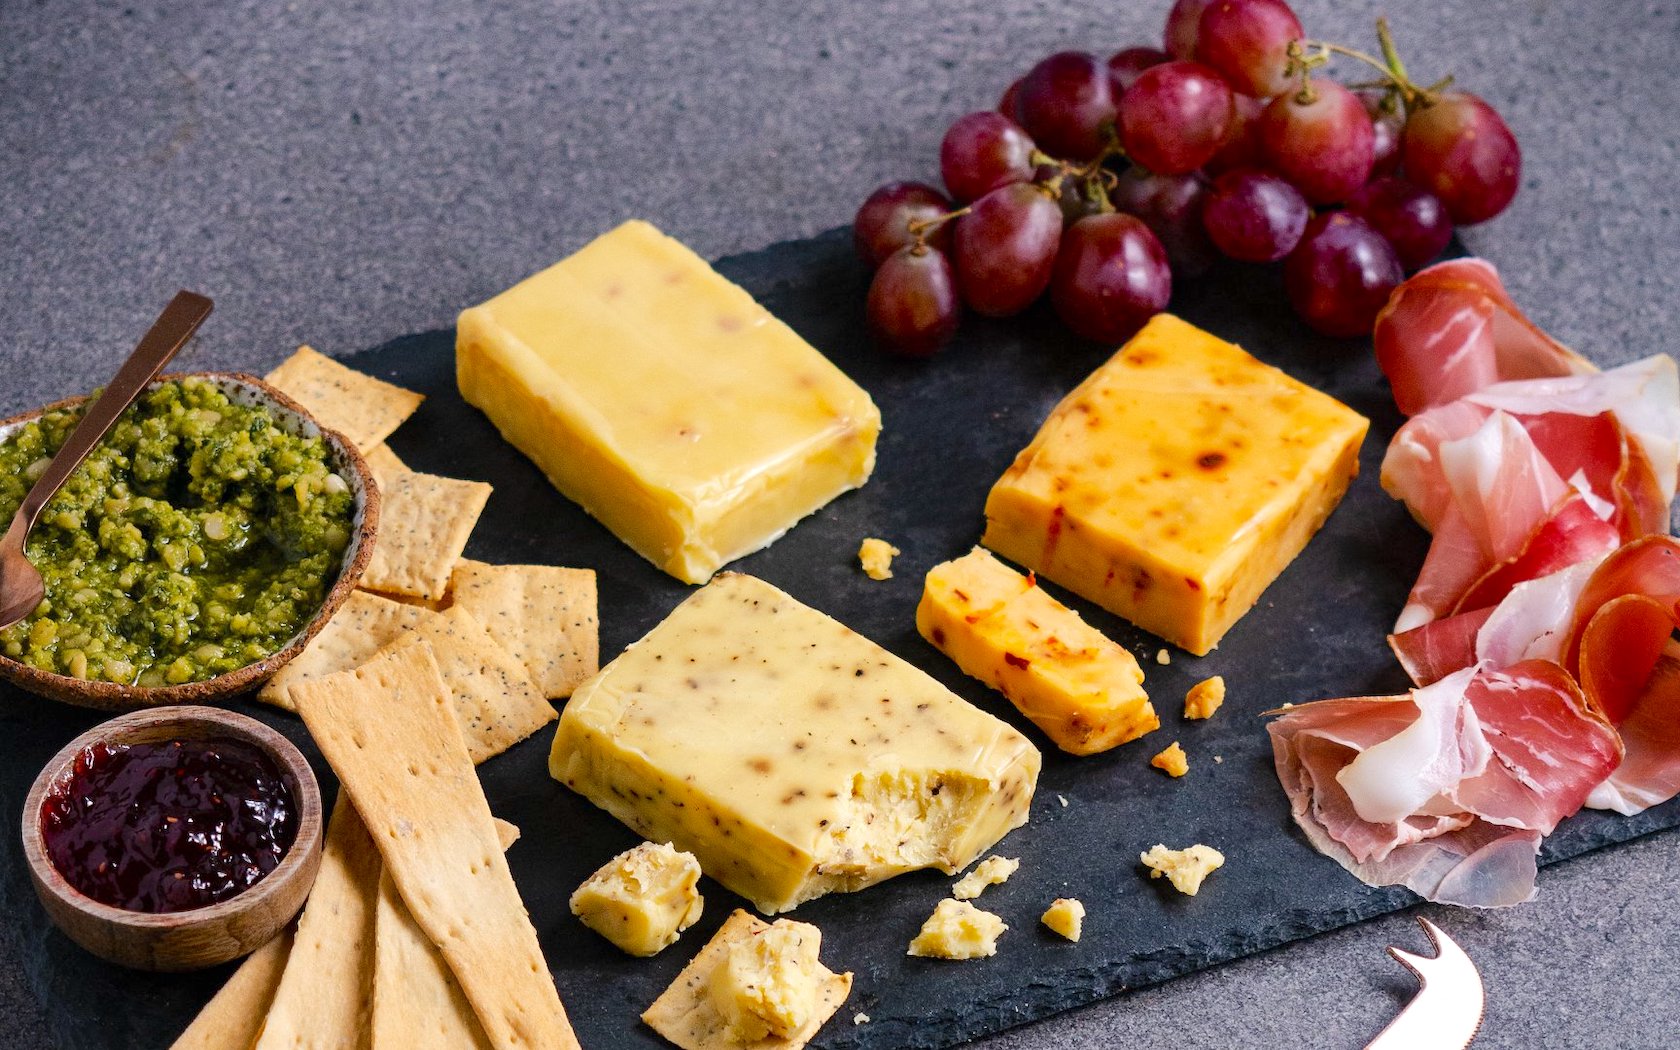 Free Cheese: Get A Cheese Board Delivered To Your Office Every Friday